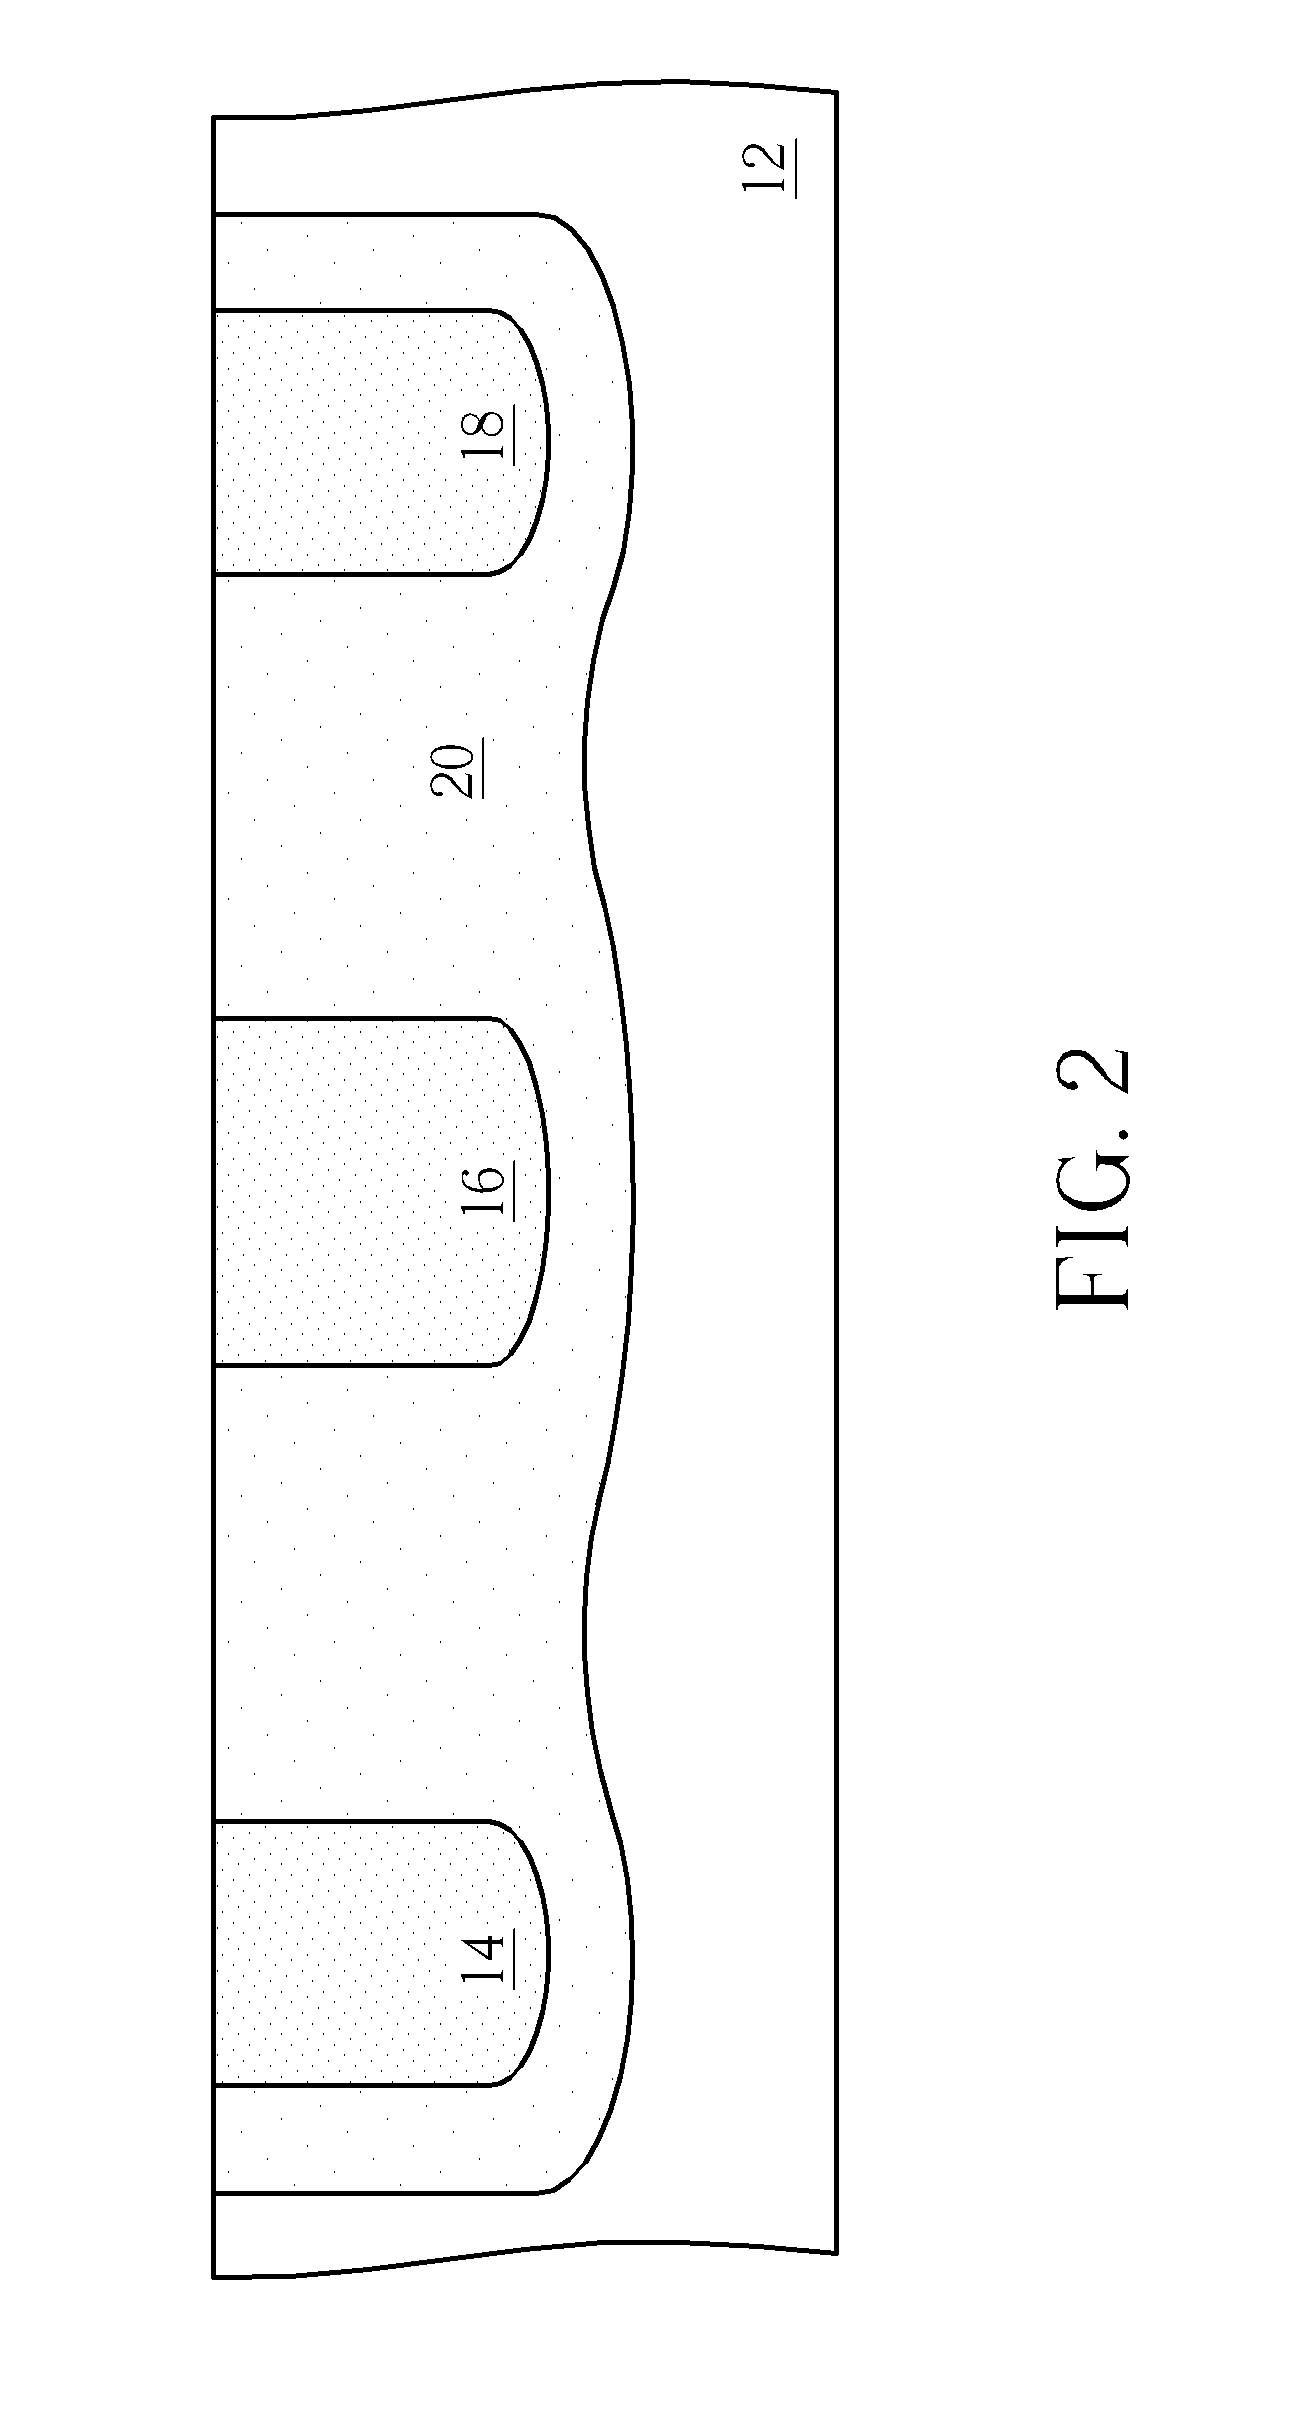 Lateral-diffusion metal-oxide semiconductor device and method for fabricating the same